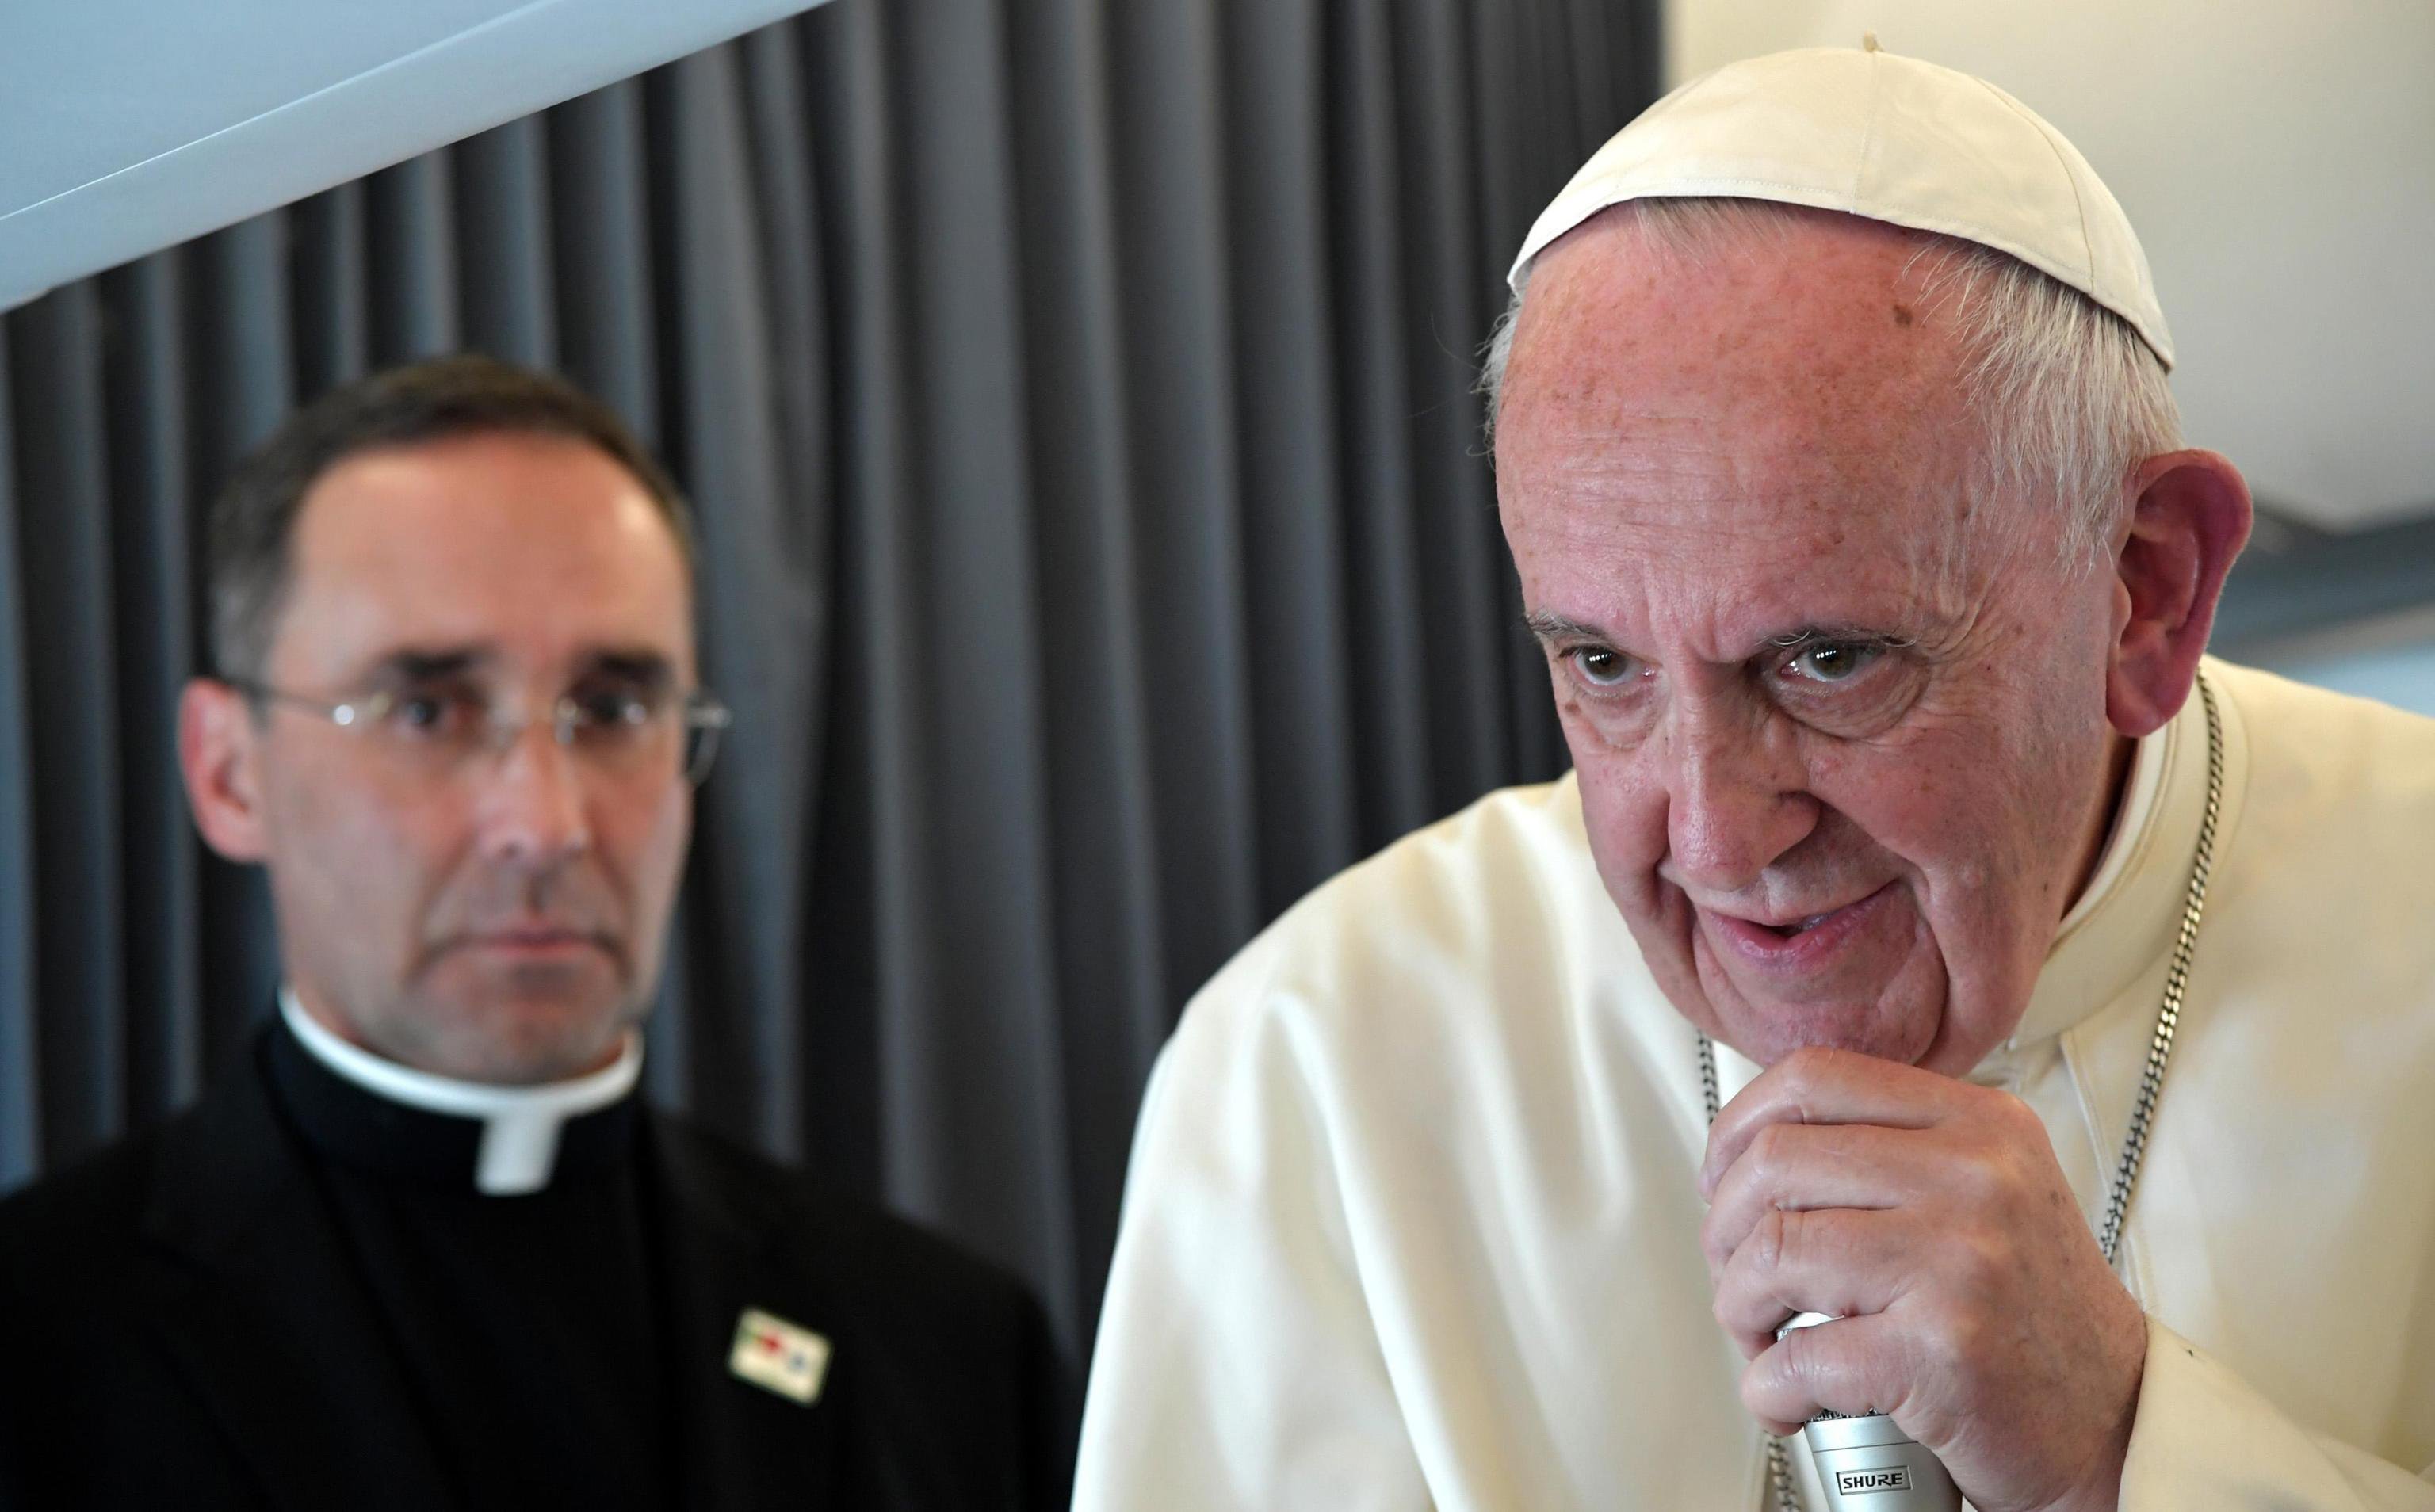 When the Pope spoke out against pretrial detention